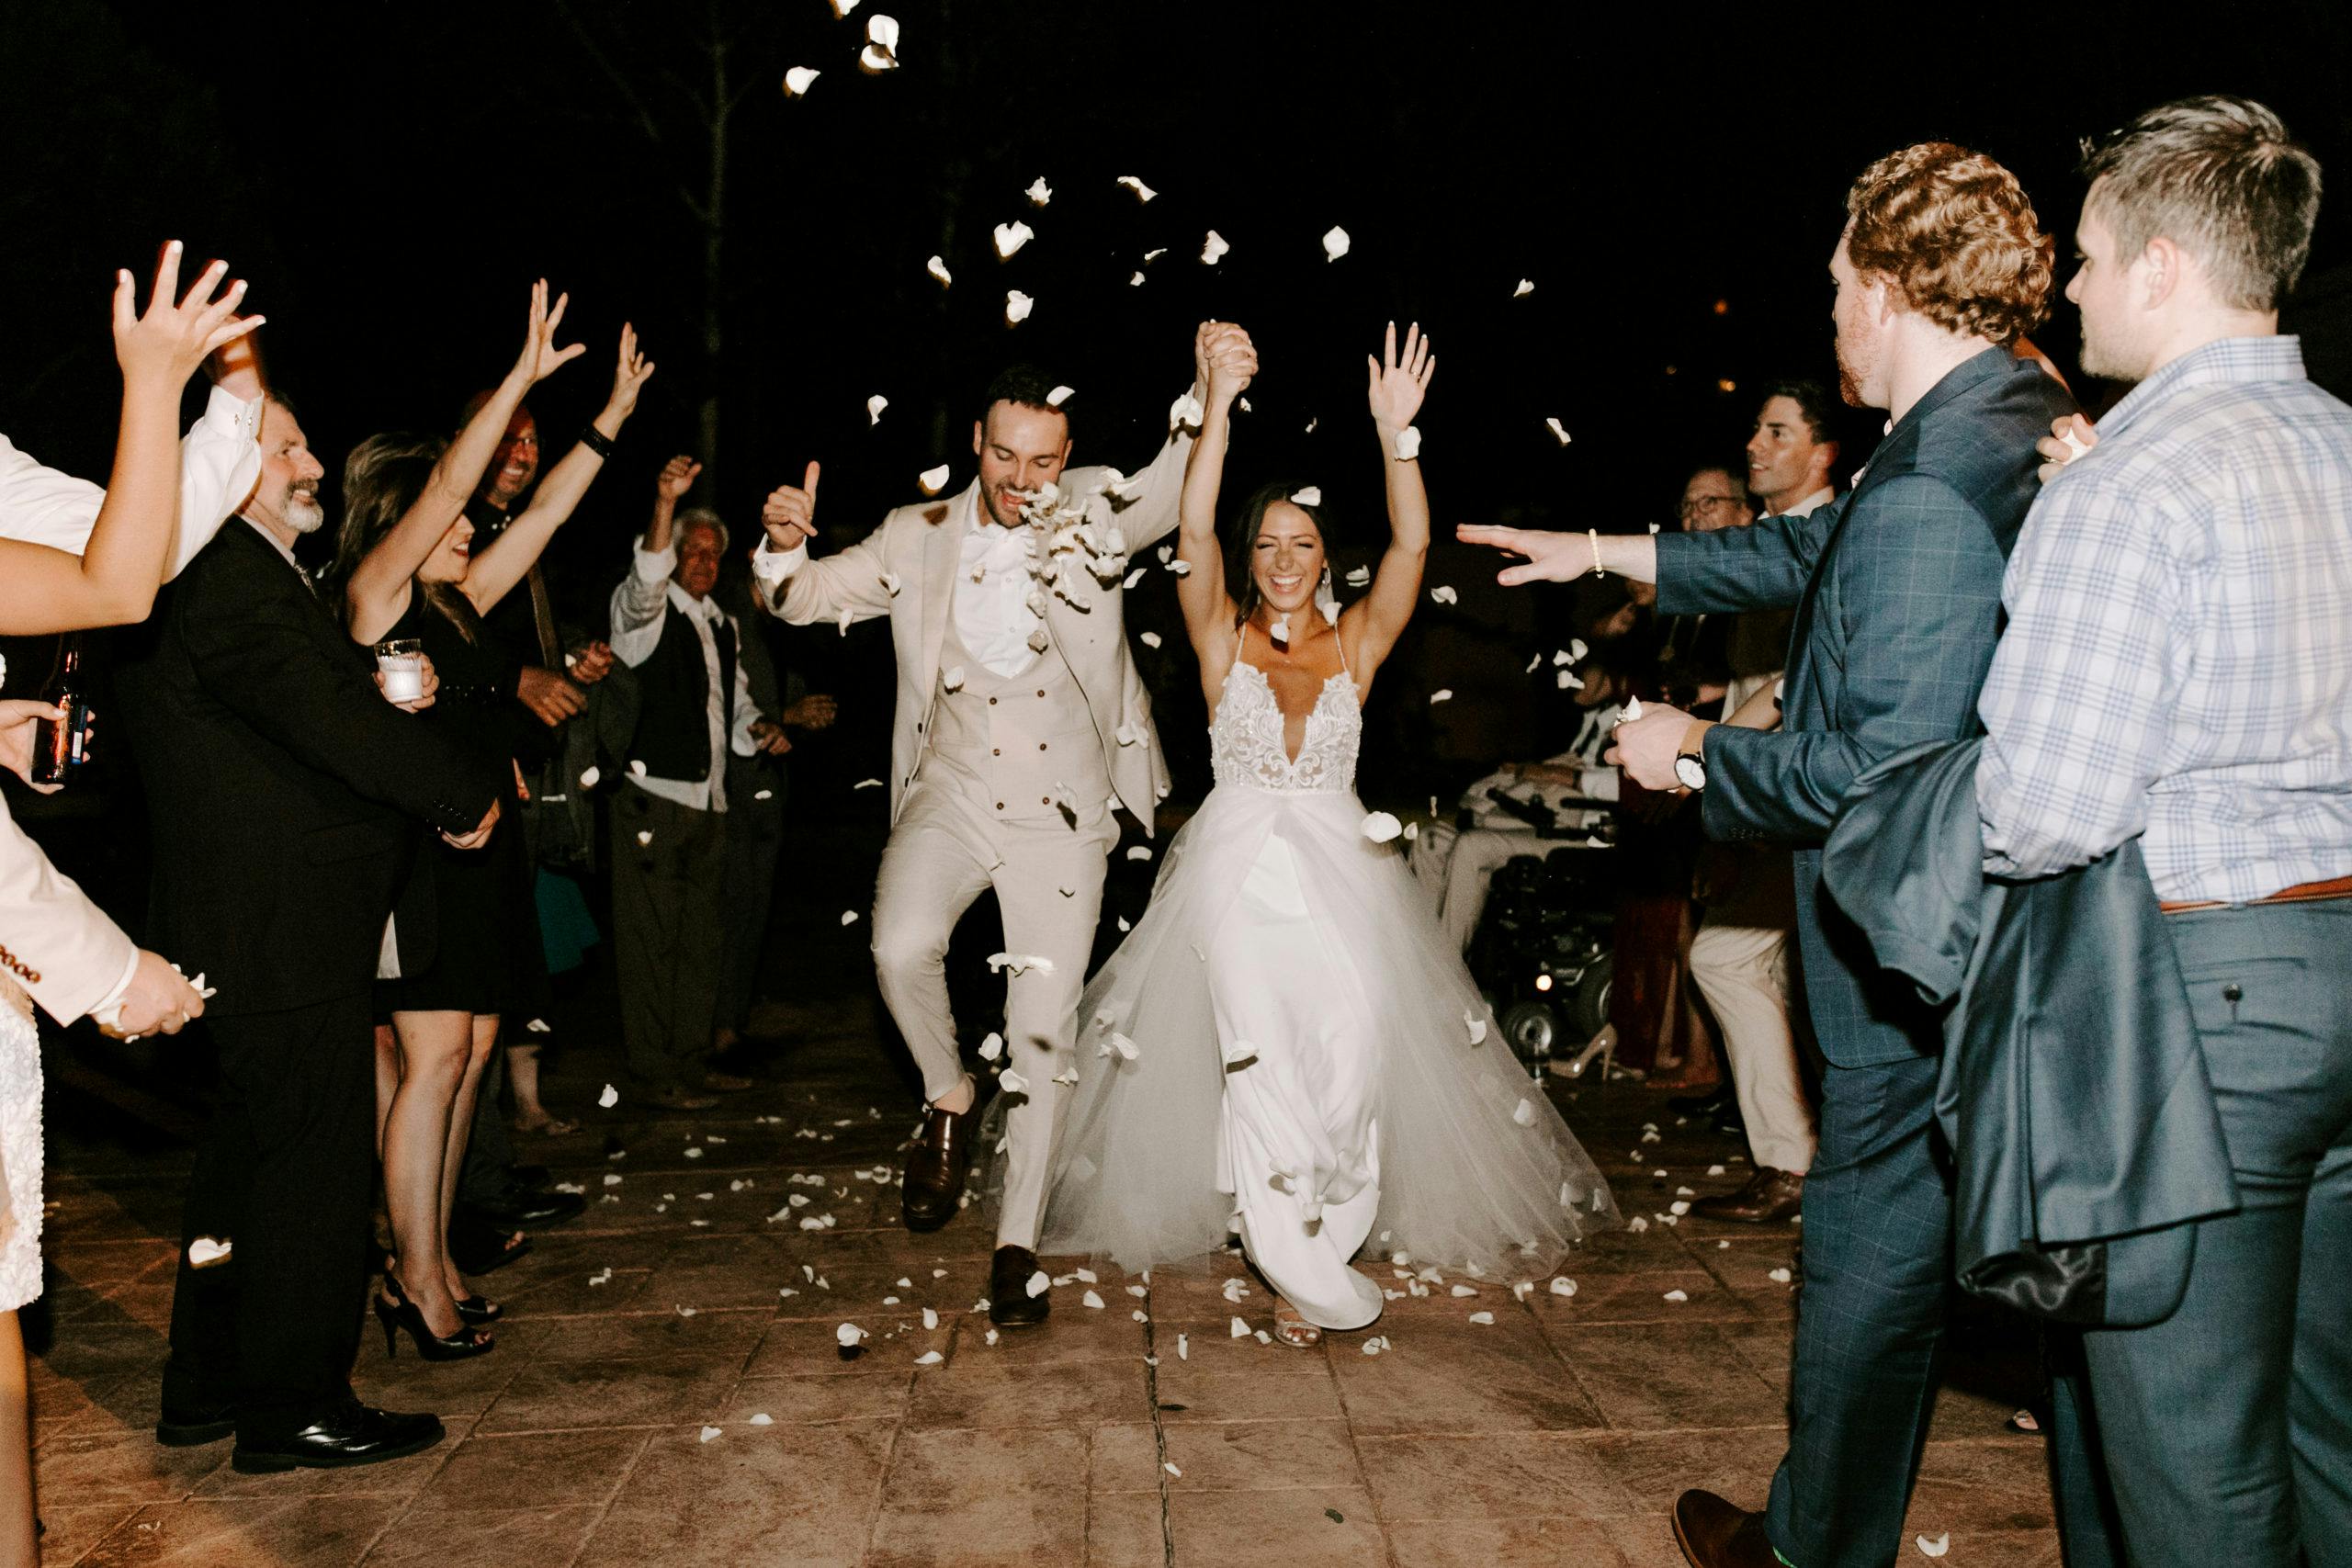 Guest throwing confetti at bride groom during reception | PartySlate